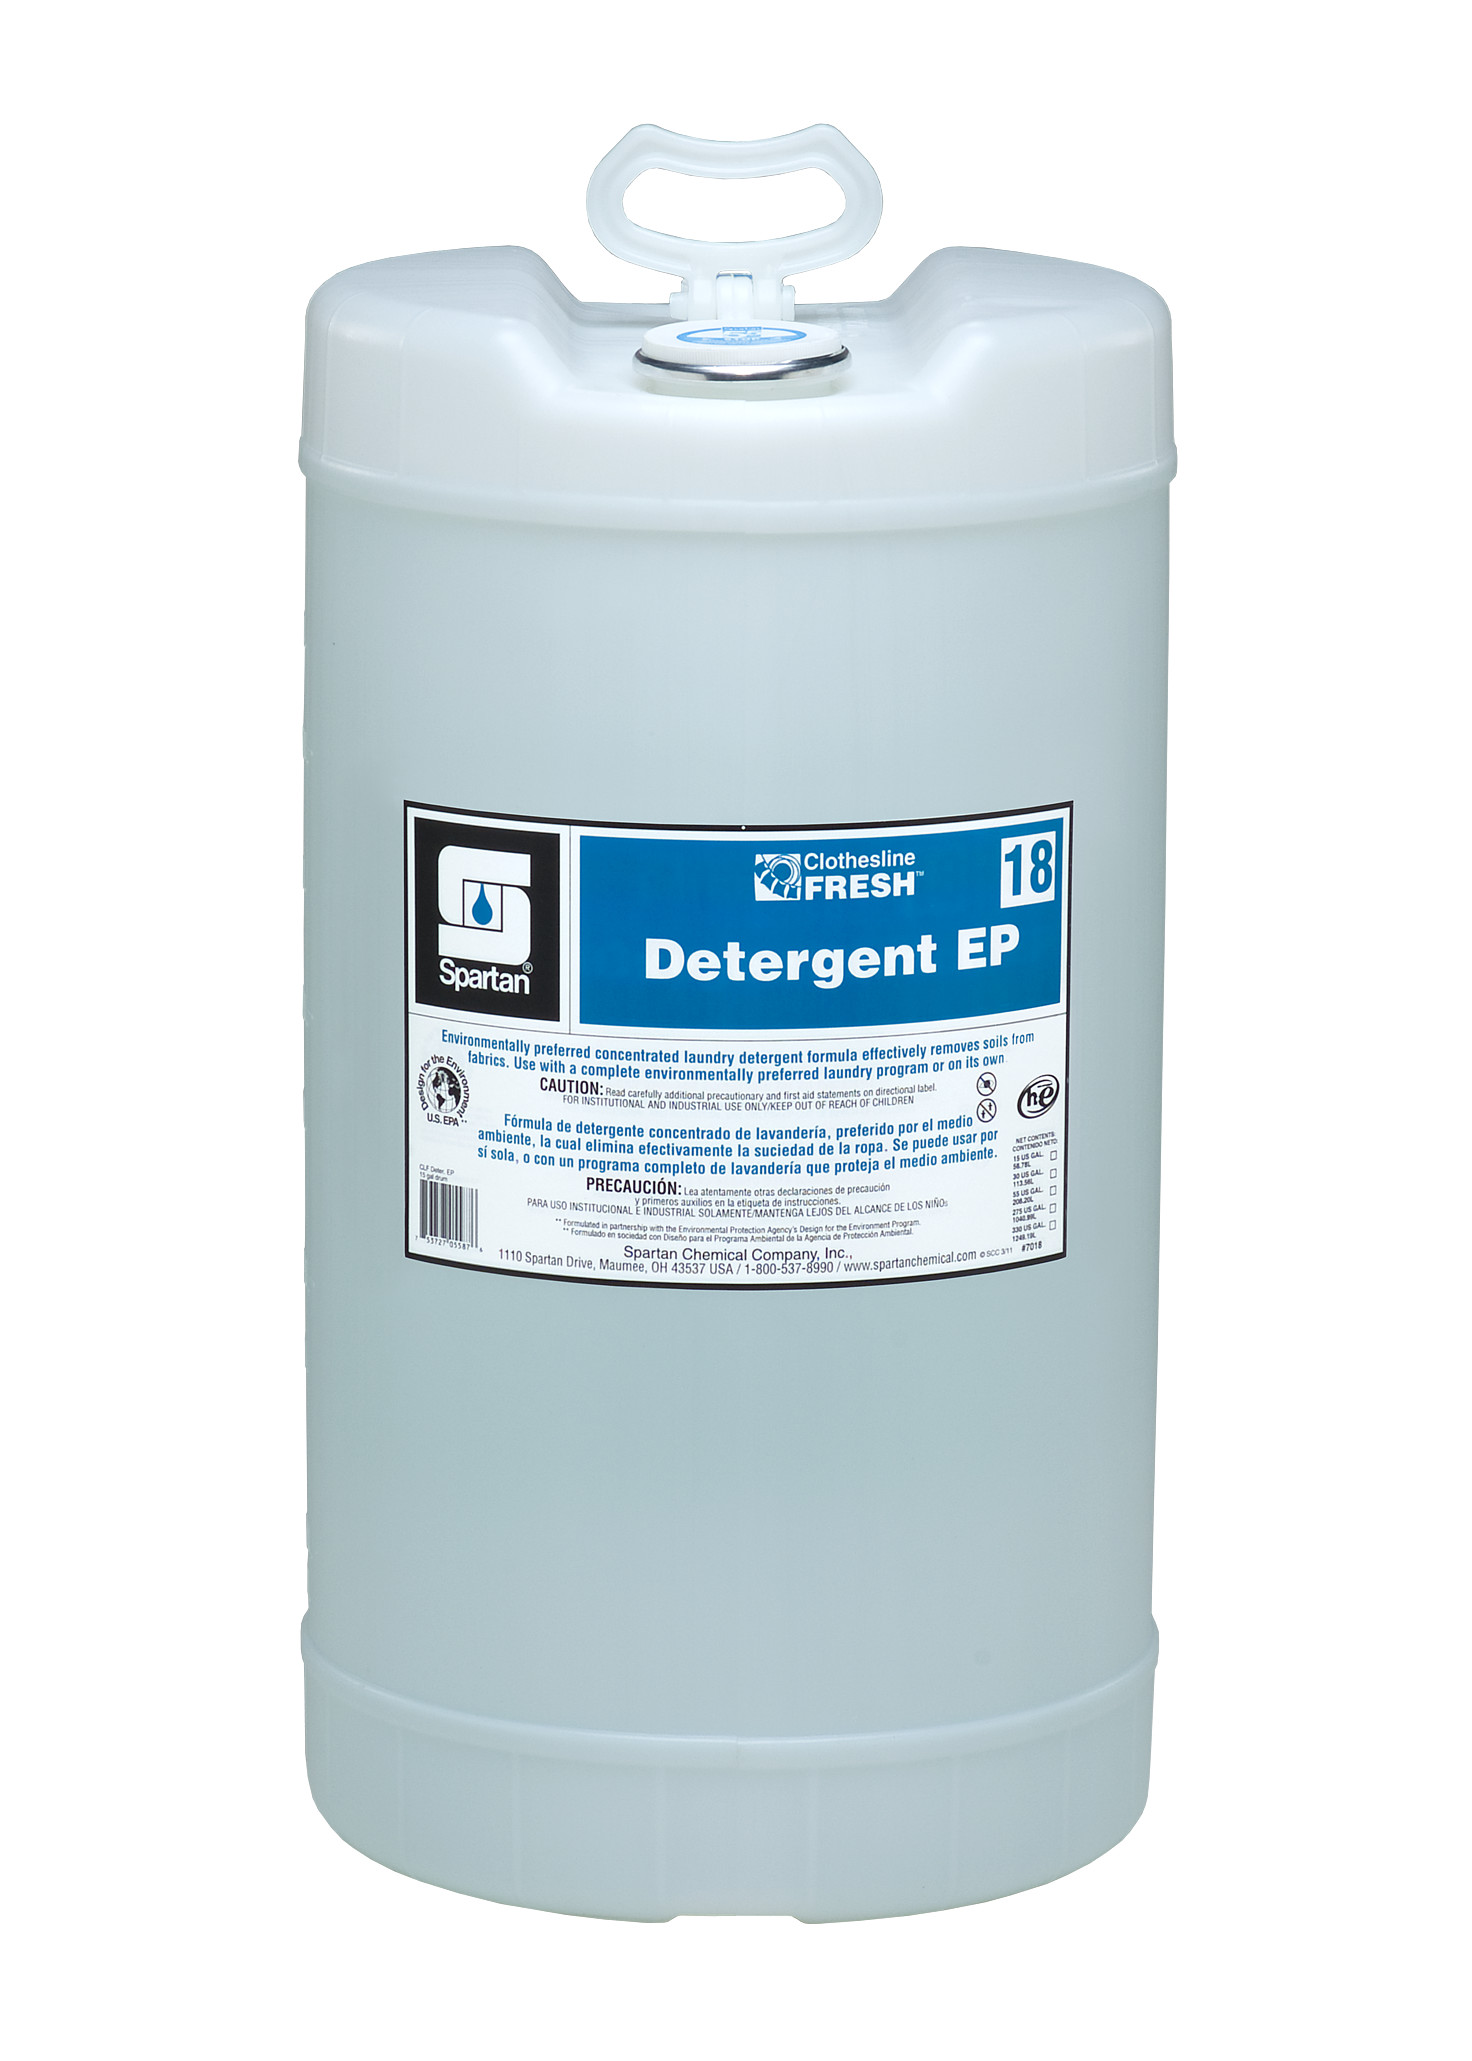 Spartan Chemical Company Clothesline Fresh Detergent EP 18, 15 GAL DRUM